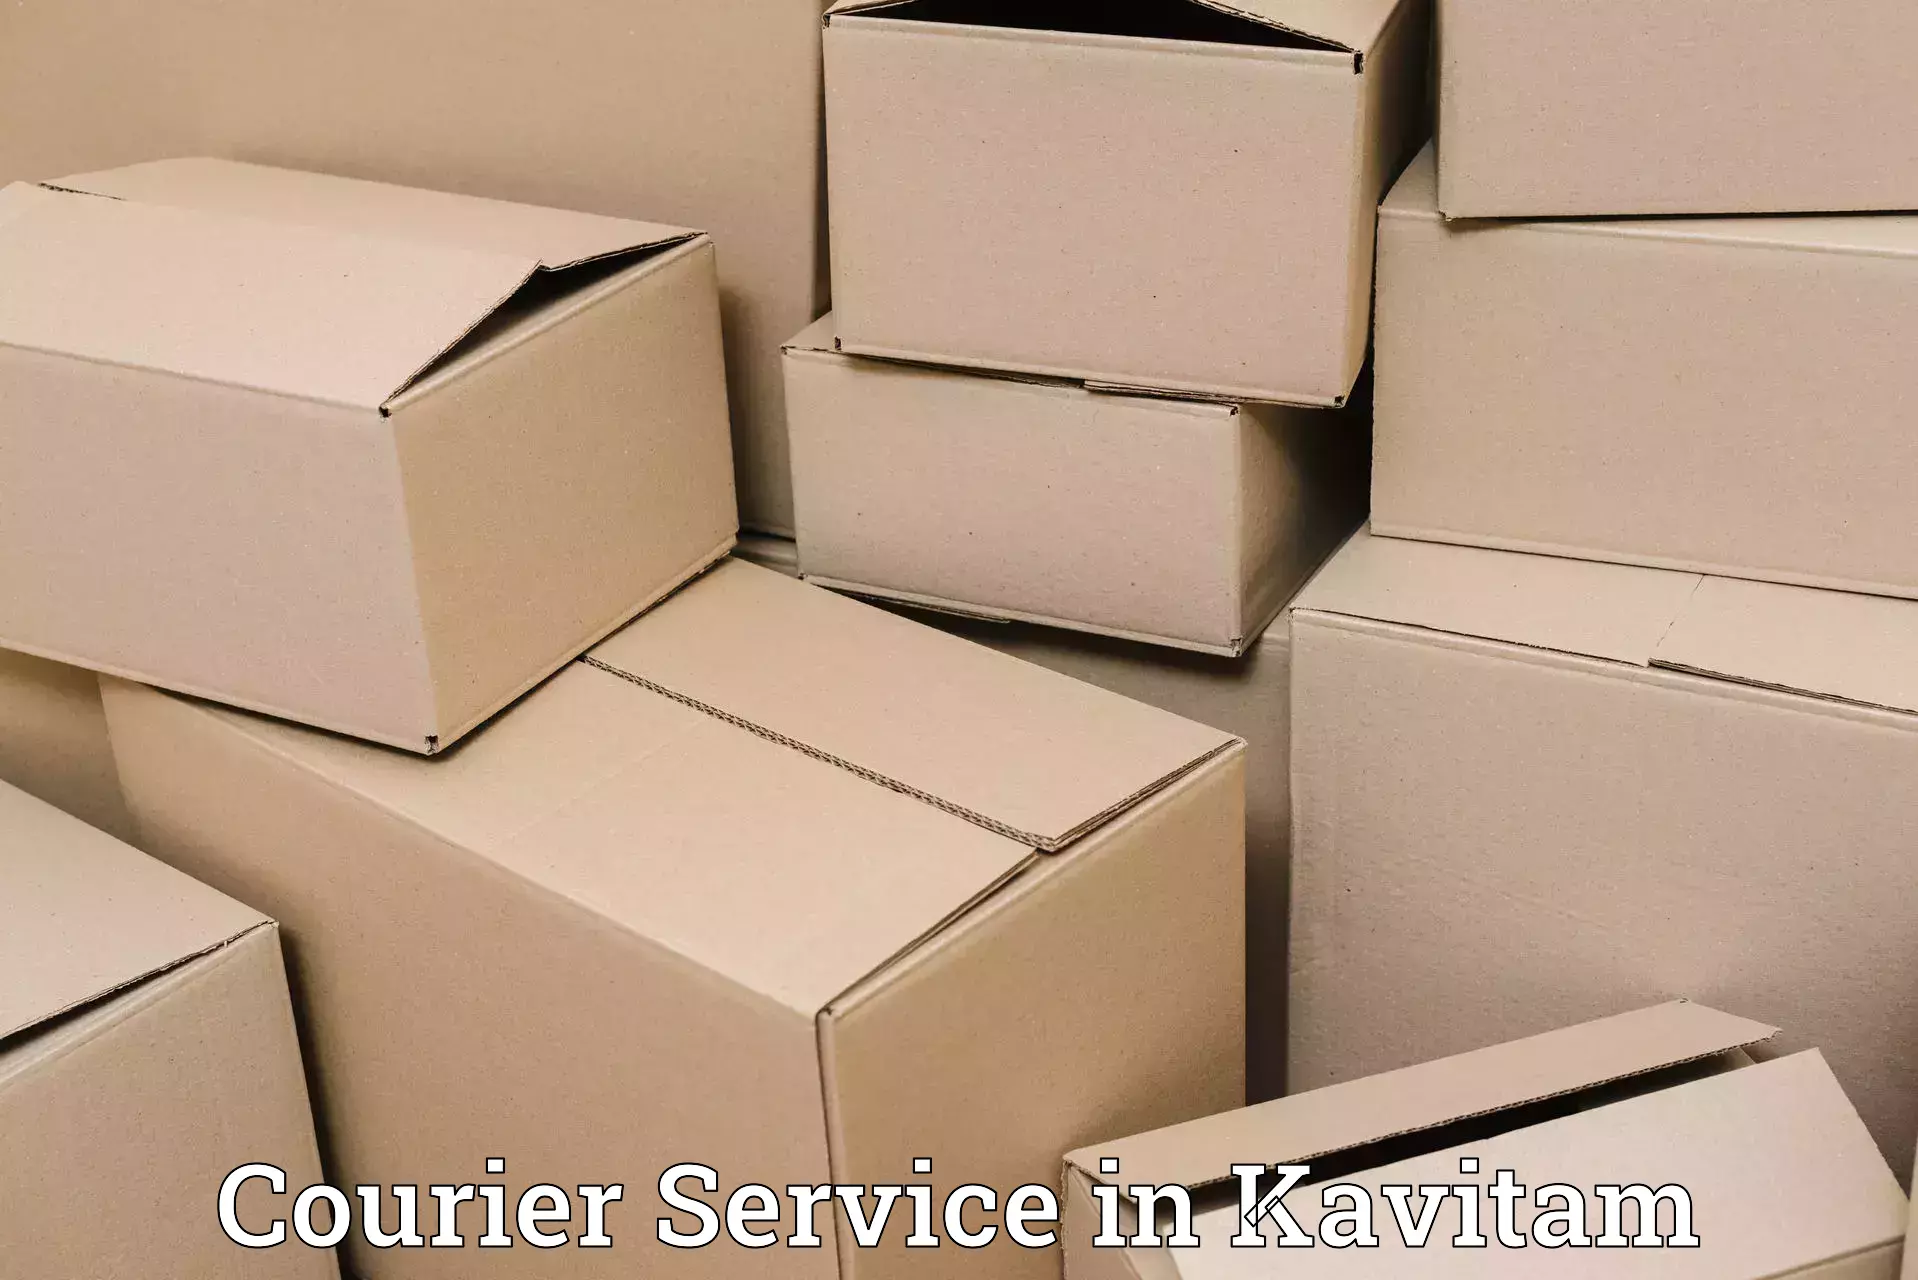 Enhanced shipping experience in Kavitam